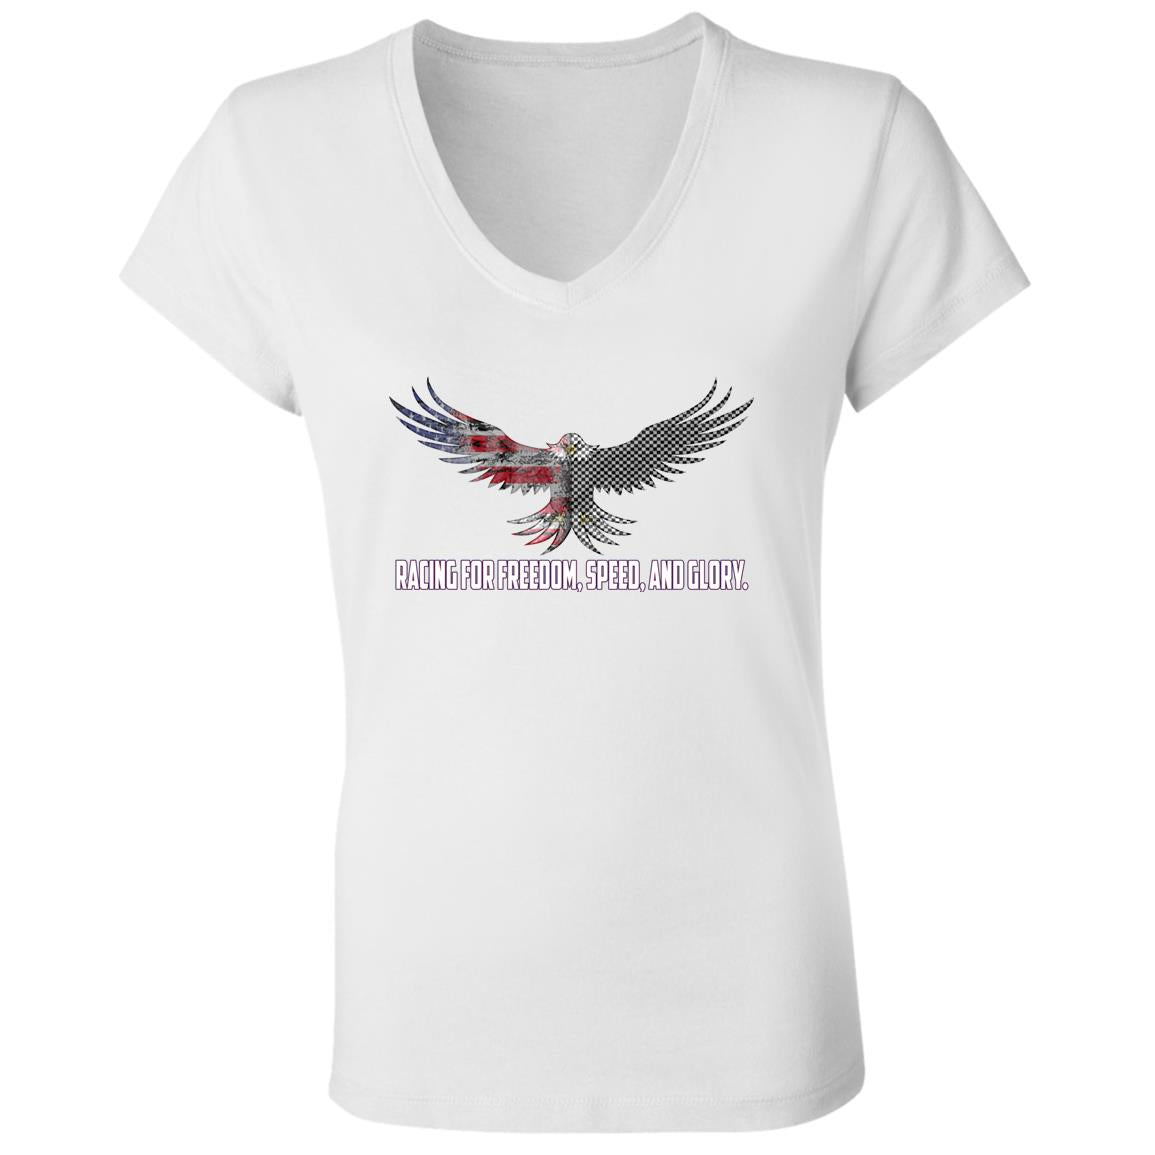 Racing For Freedom, Speed, And Glory Ladies' Jersey V-Neck T-Shirt